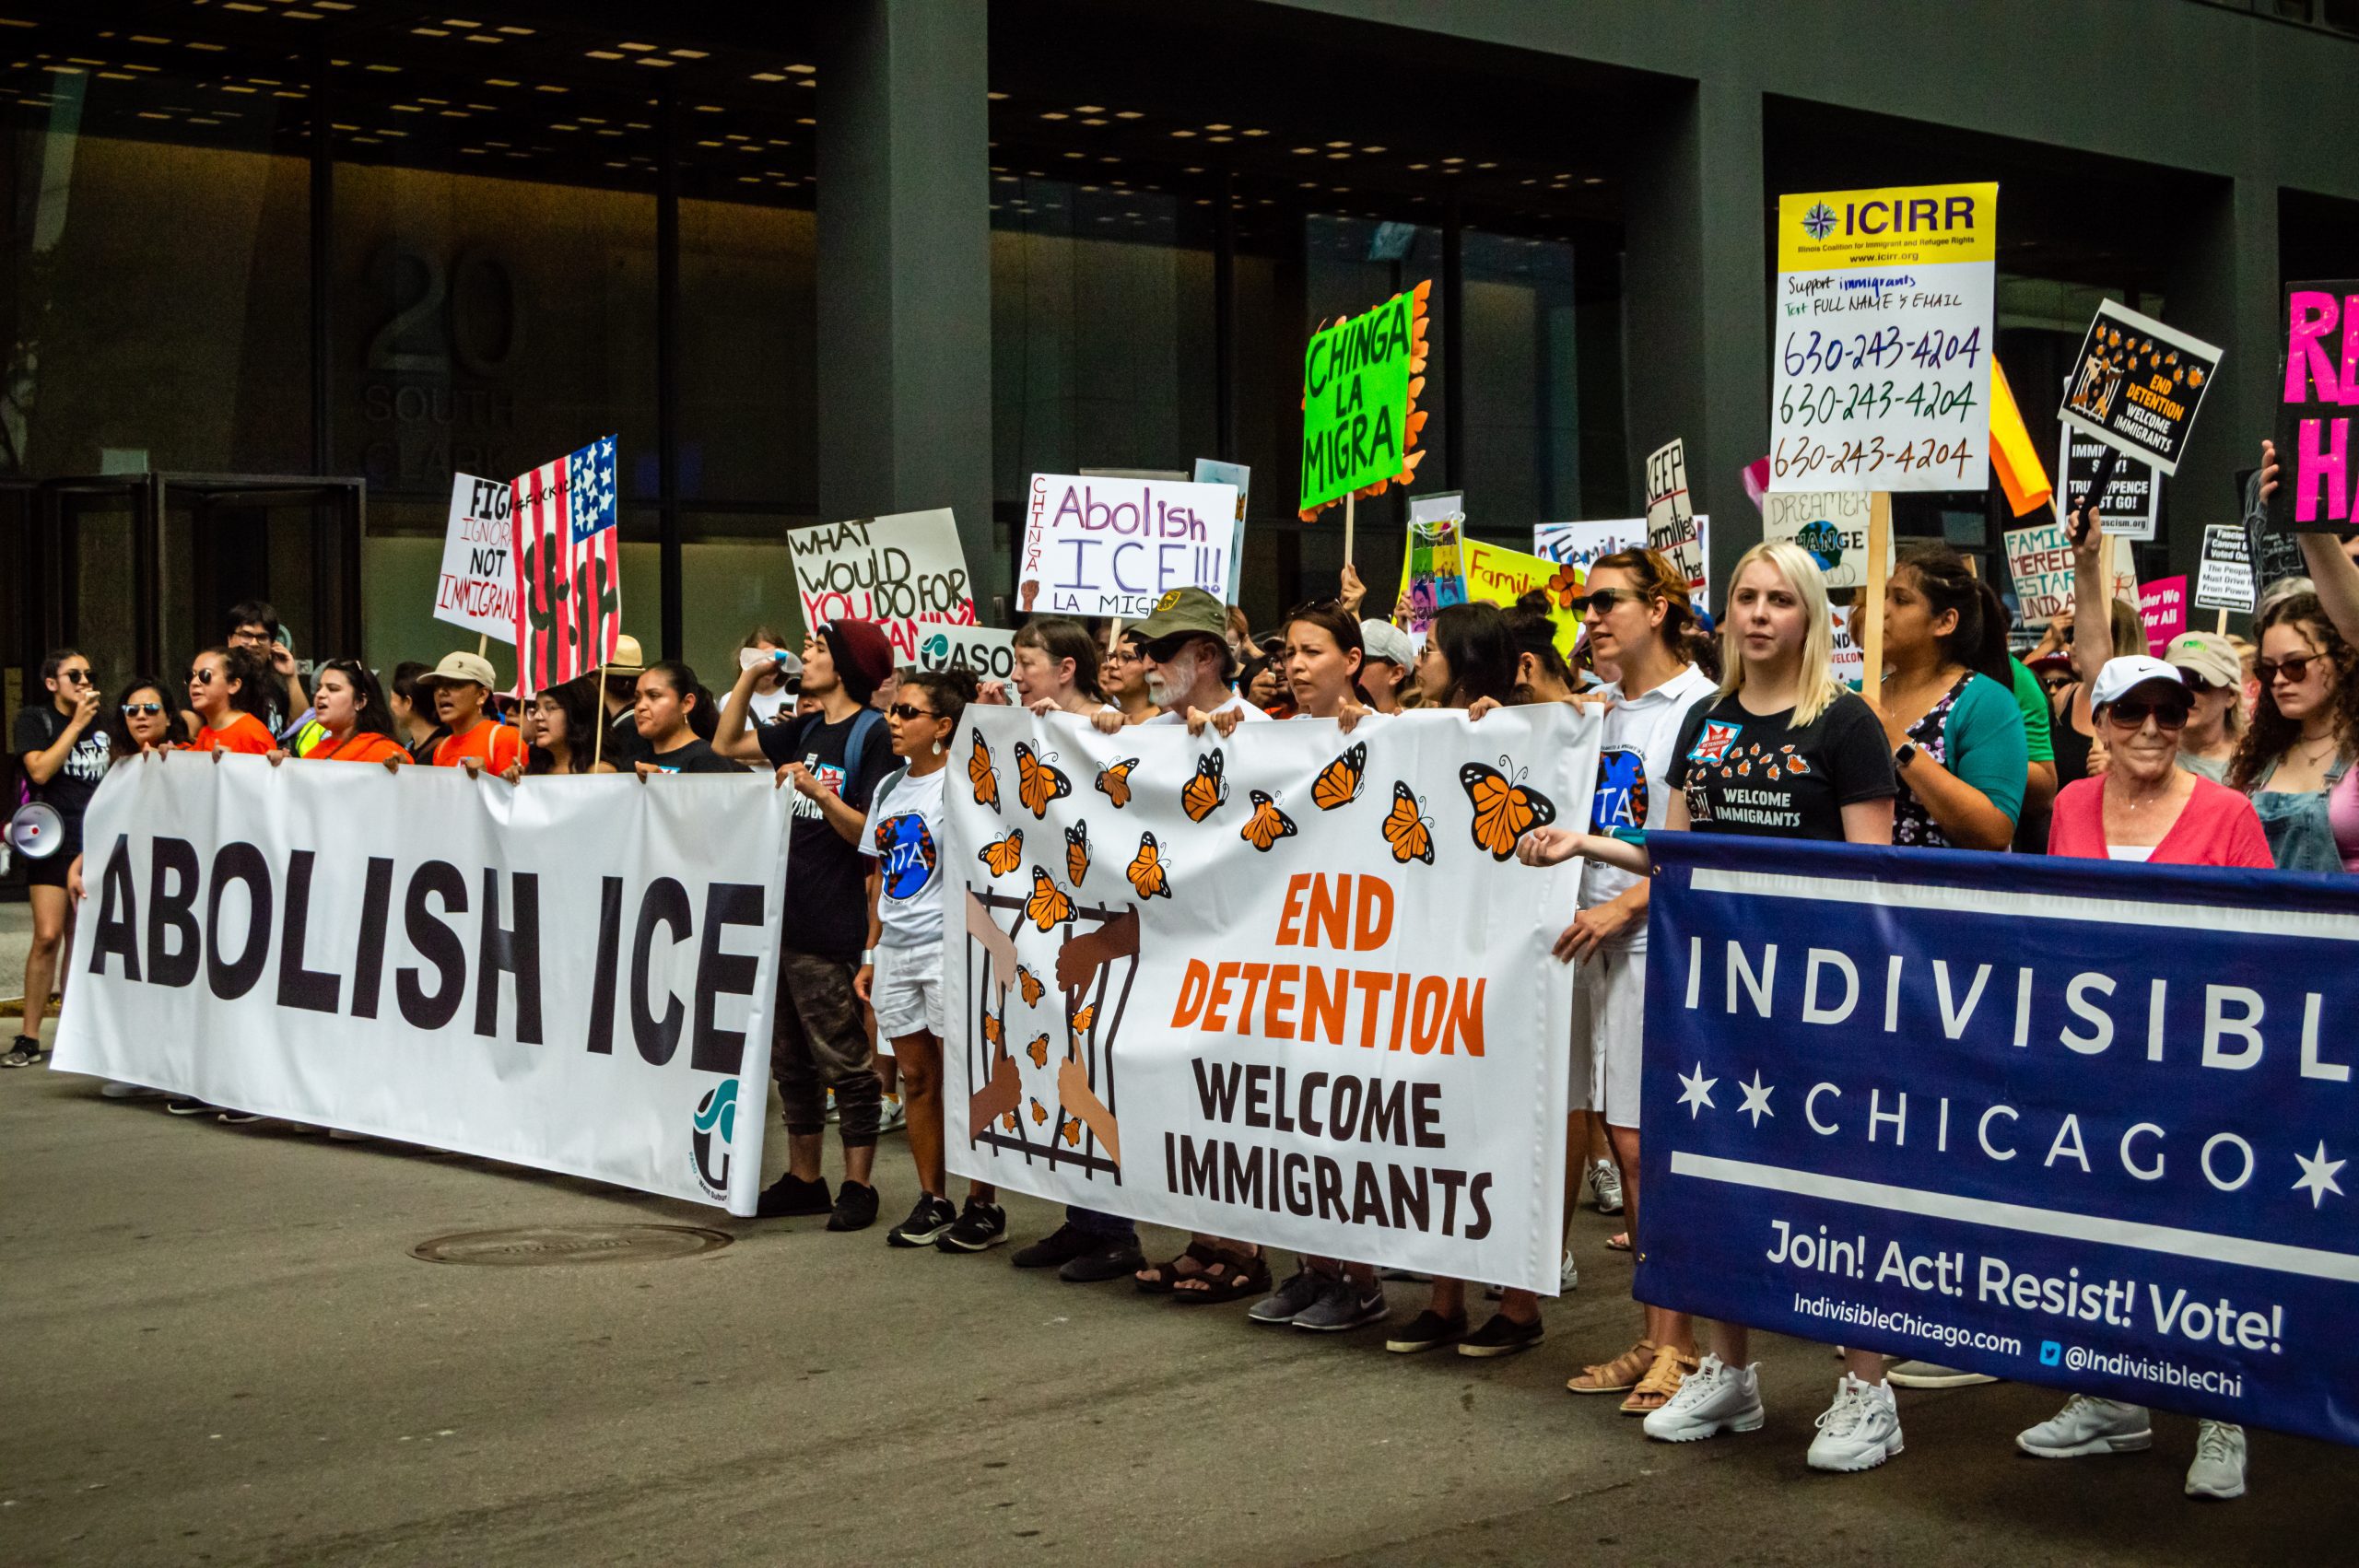 Downtown,,Chicago-july,13,,2019:,Protest,Against,Ice,And,Customs,And